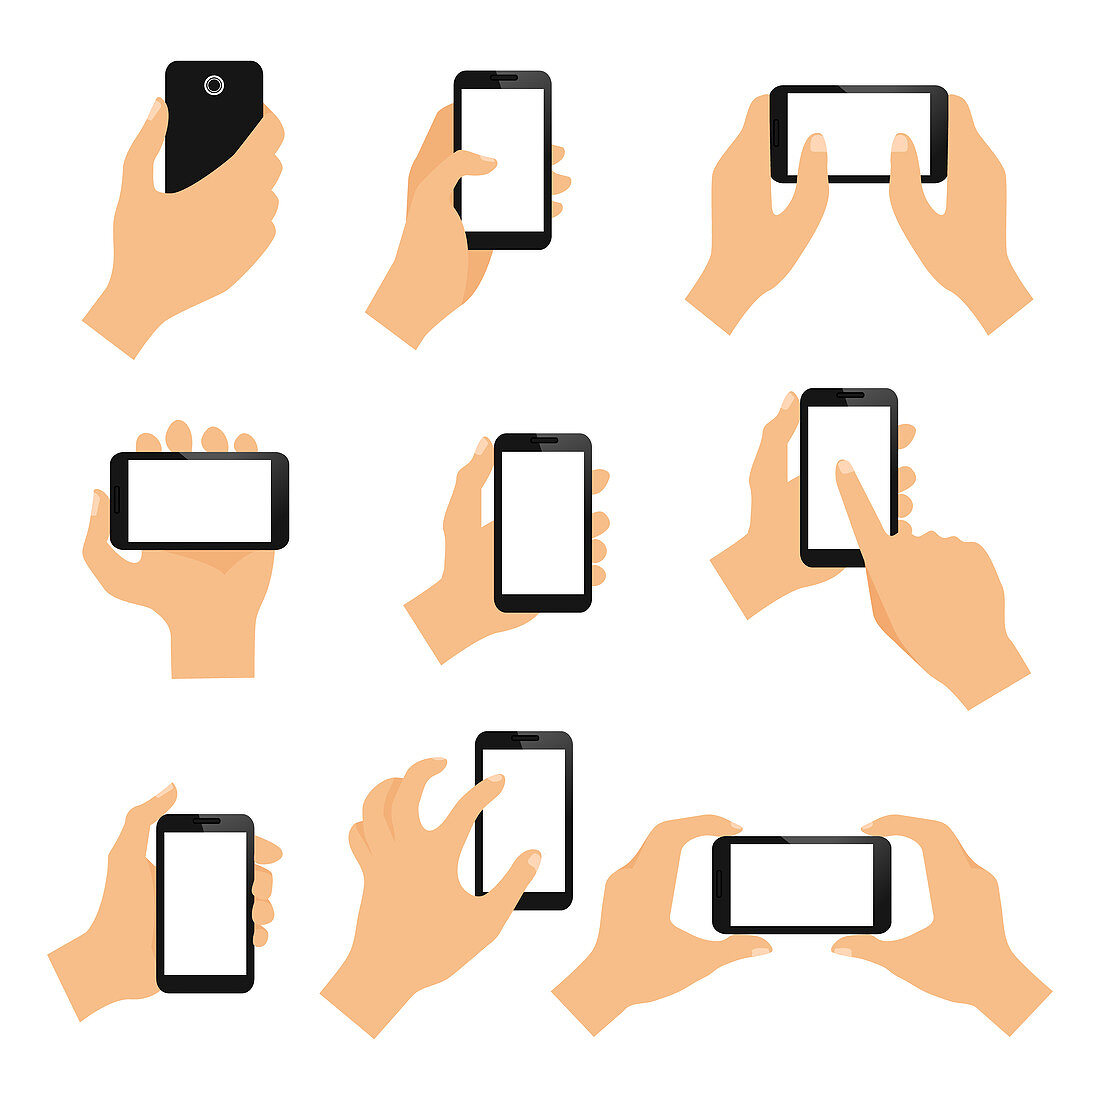 Touch screen hand gestures, illustration